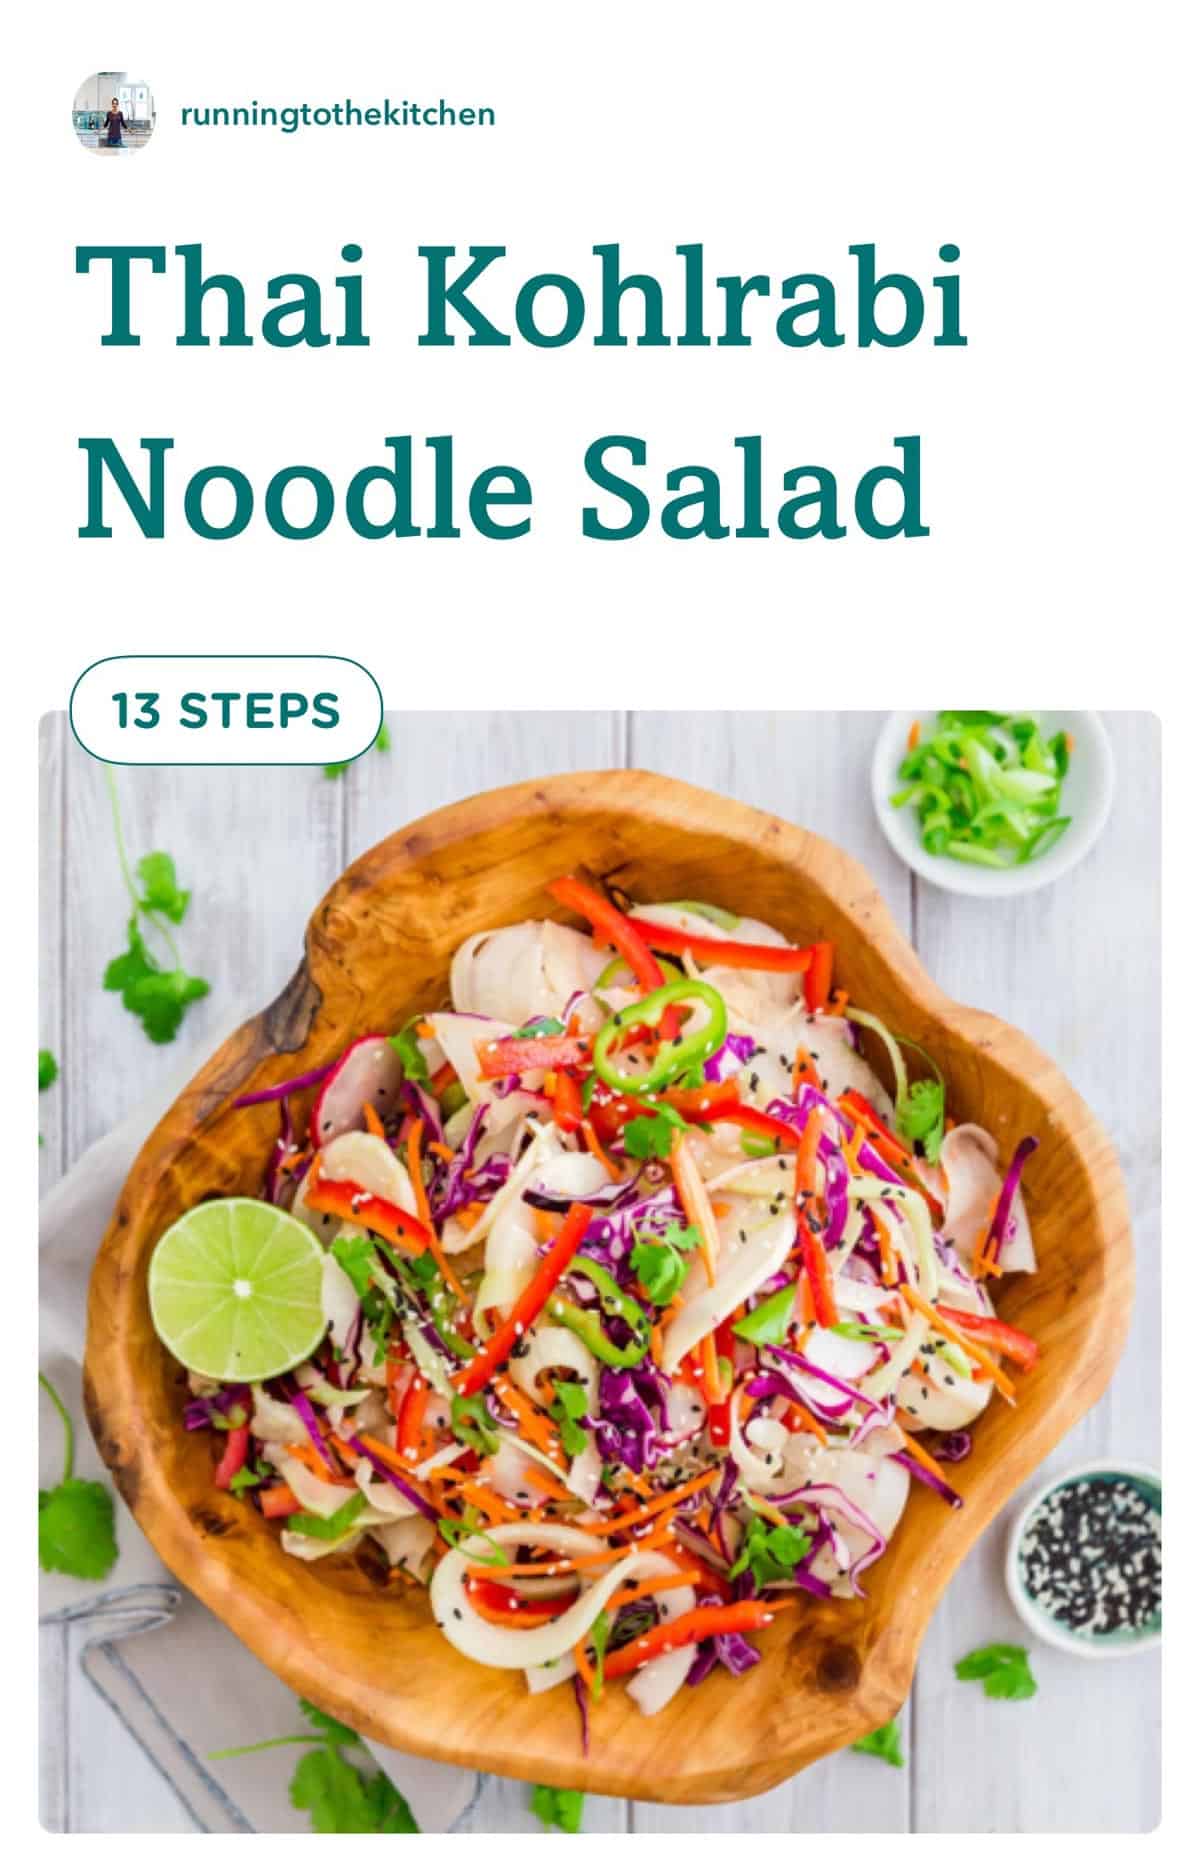 Make this colorful, easy Thai flavored salad with kohlrabi noodles! Spiralized kohlrabi noodles make a healthy salad base. Pair with fresh crispy vegetables & an Asian inspired vinaigrette.